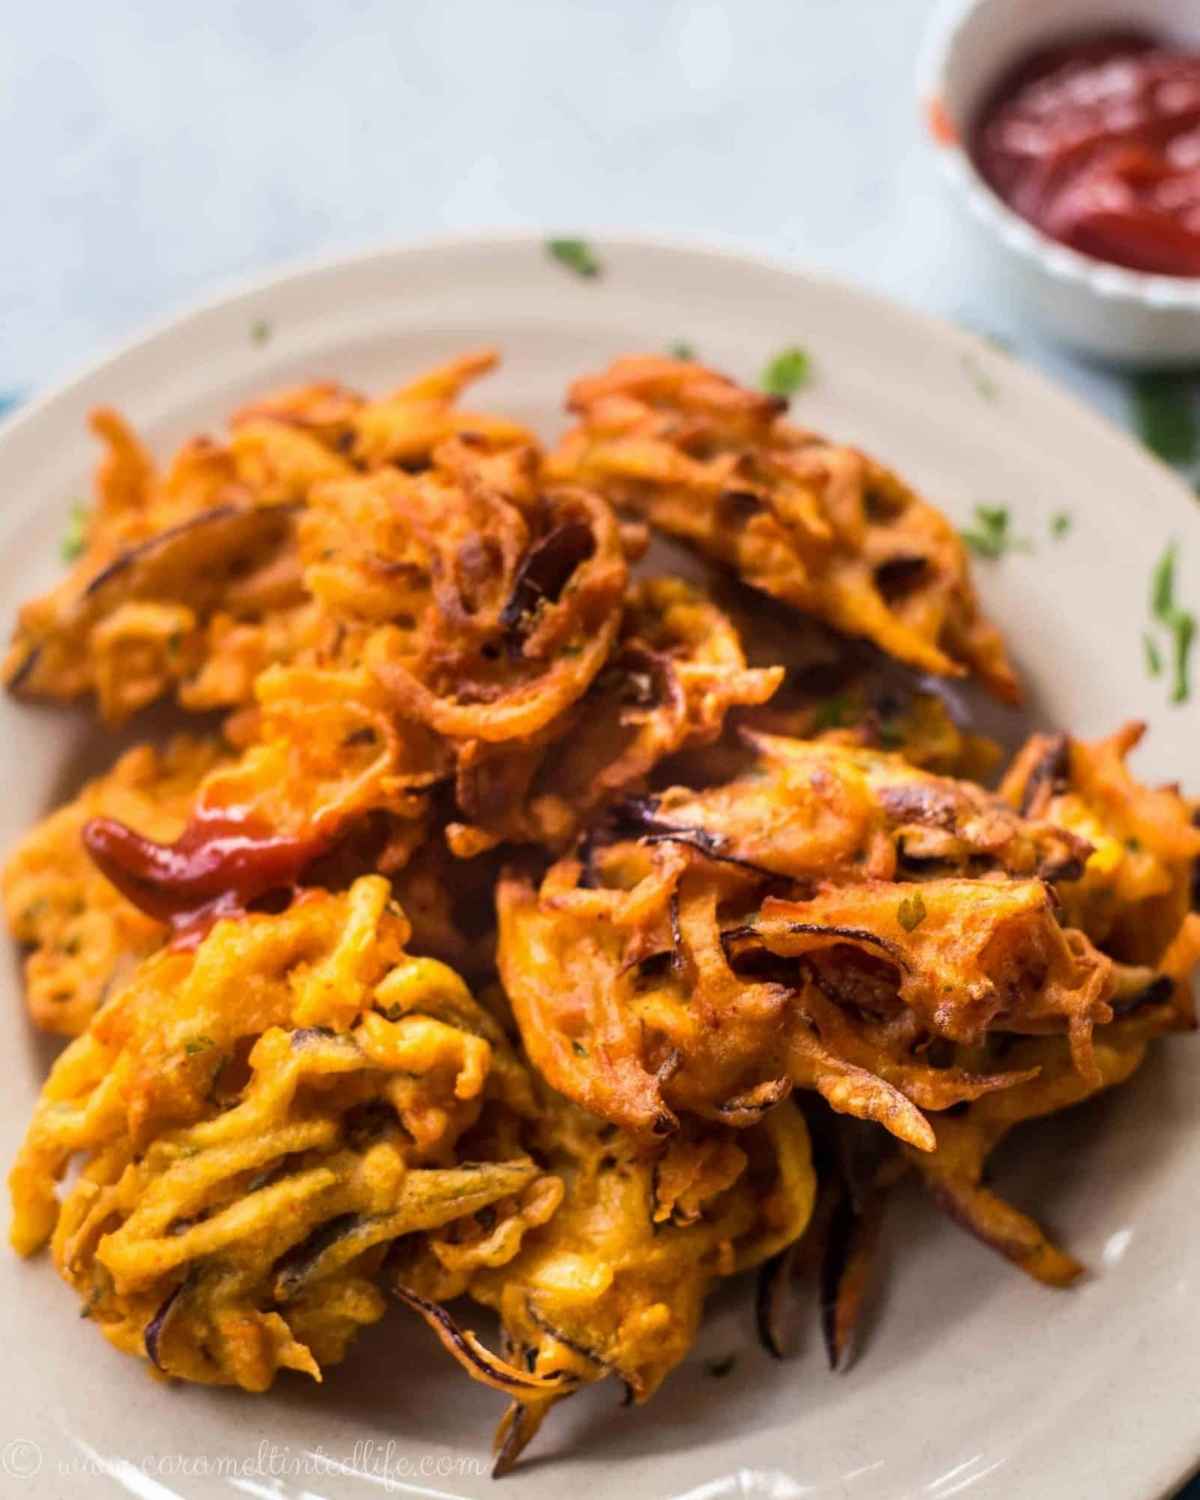 Vegetable pakoras sitting on a plate with ketchup